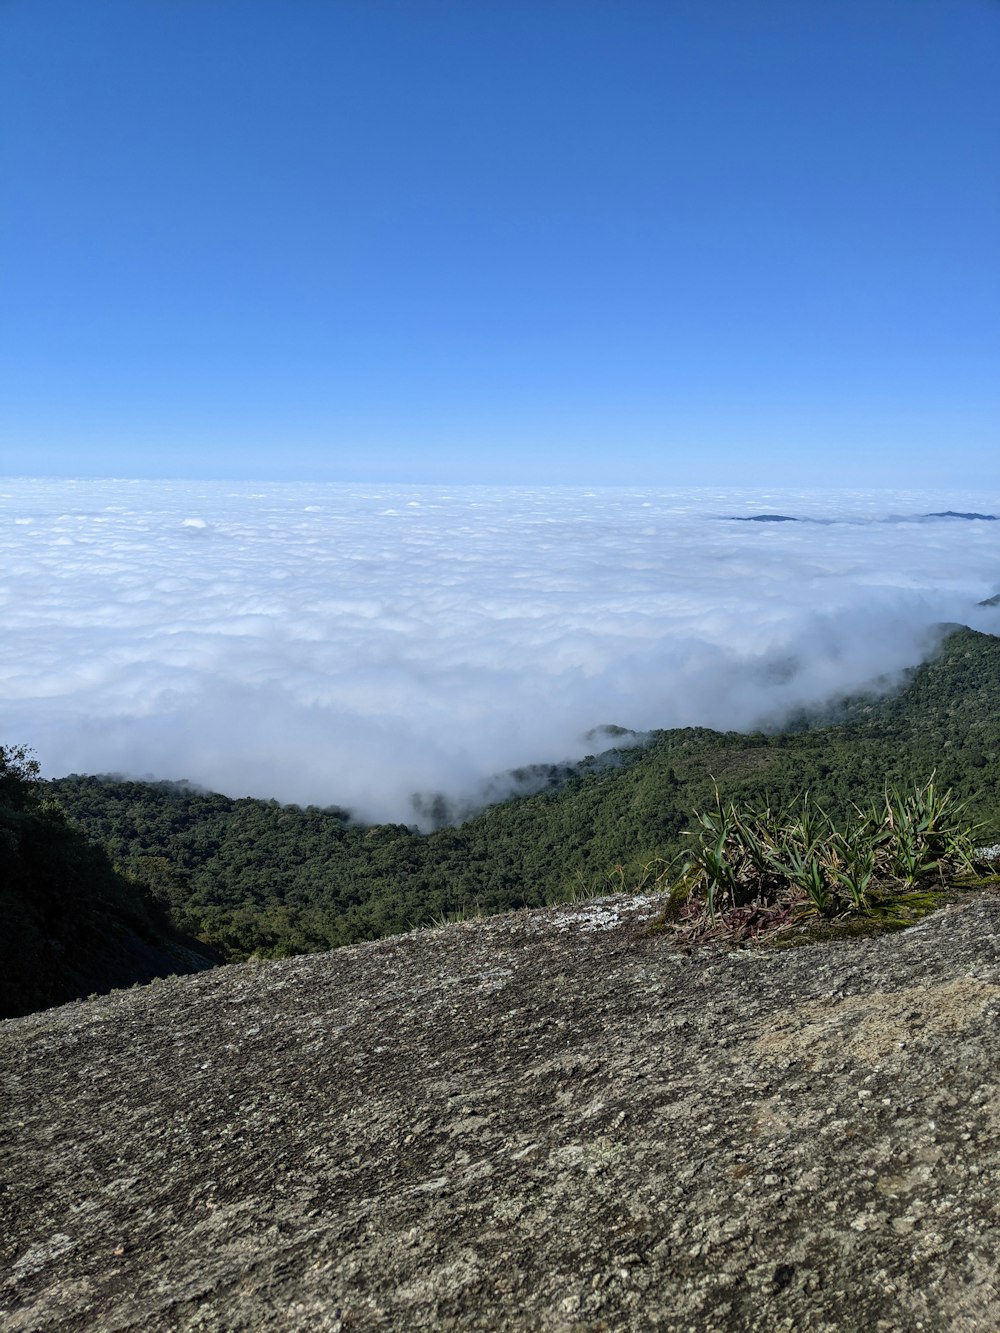 the view from the top of a mountain in the clouds